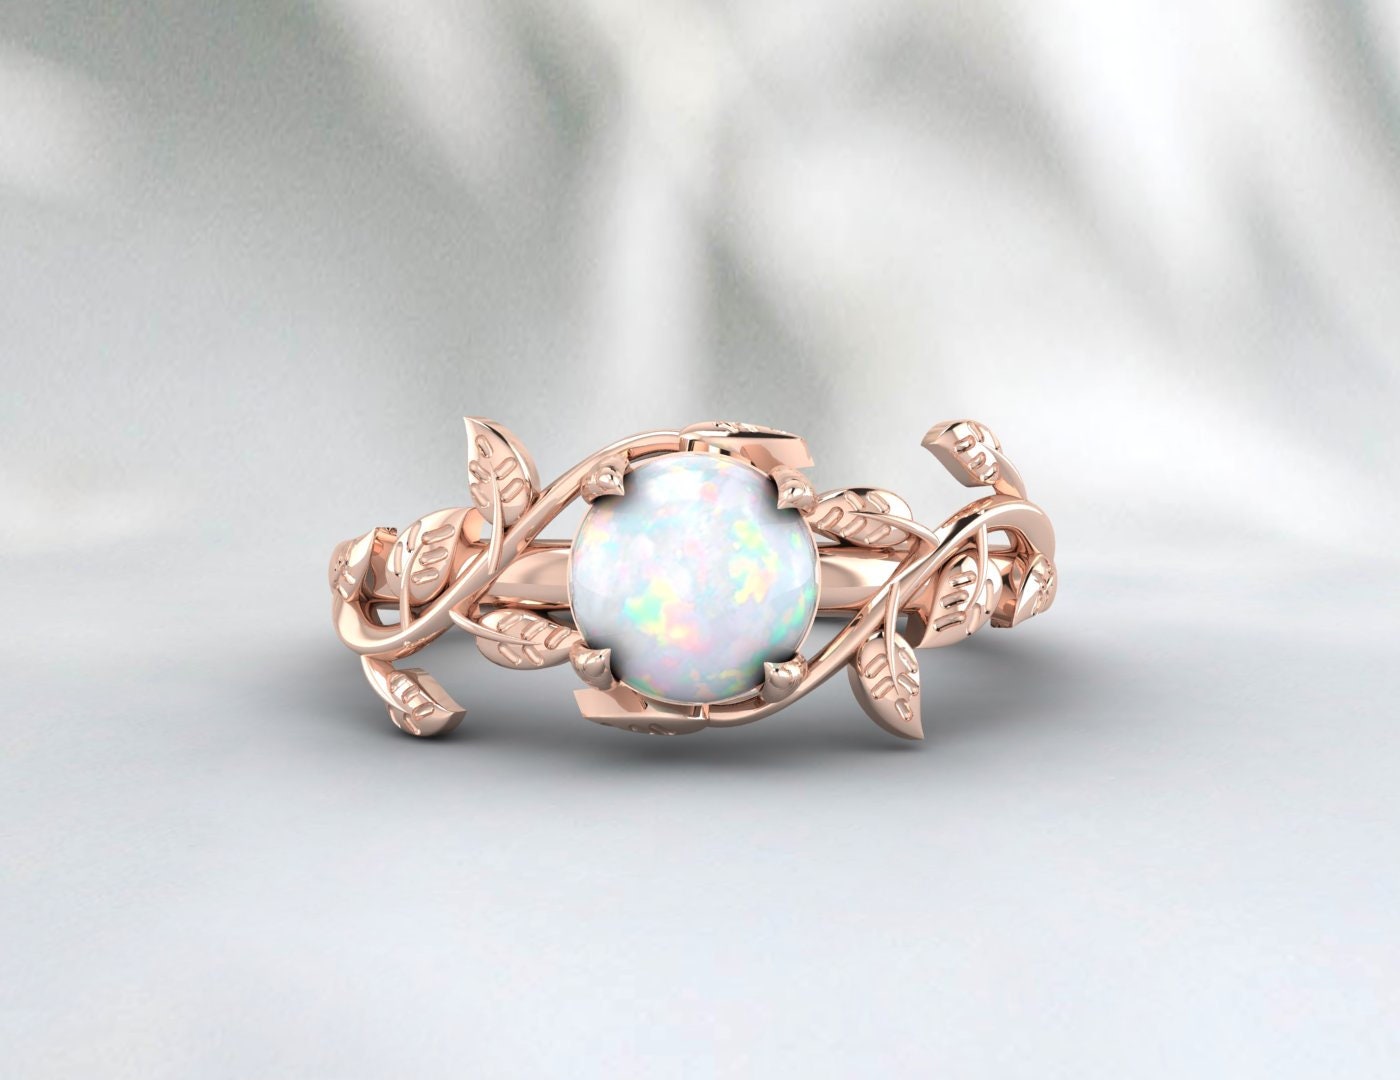 Natural 1 Carat Opal Vine Leaf Ring, Nature Inspired Round Opal Solitaire Ring, October Gemstone Ring, October Bridal Ring, Vine Leaf Opal